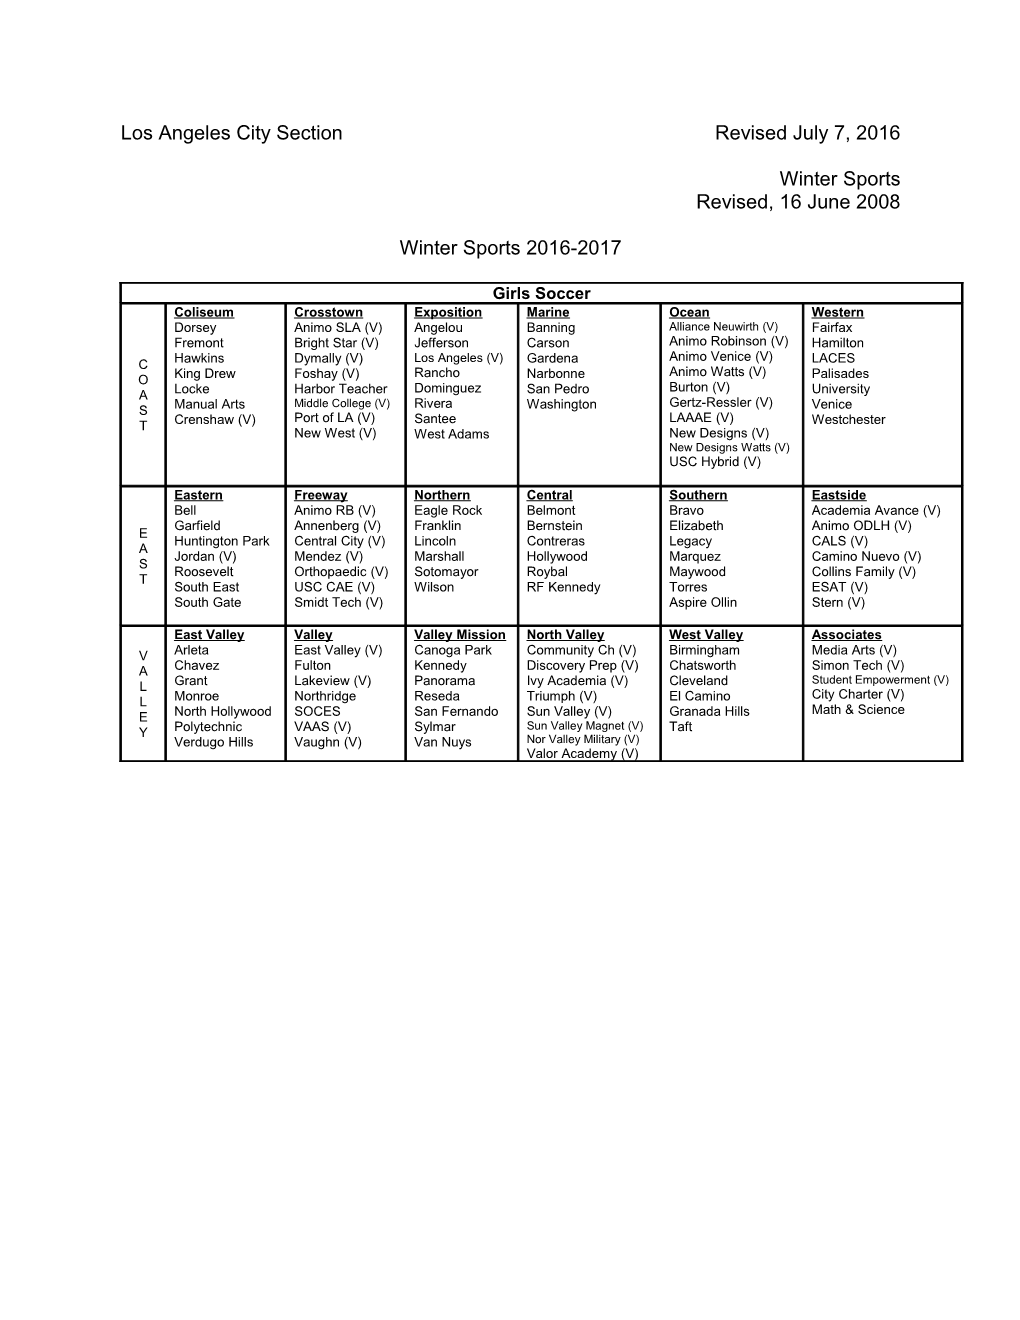 Los Angeles City Sectionrevised July 7, 2016 Winter Sports Revised, 16 June 2008